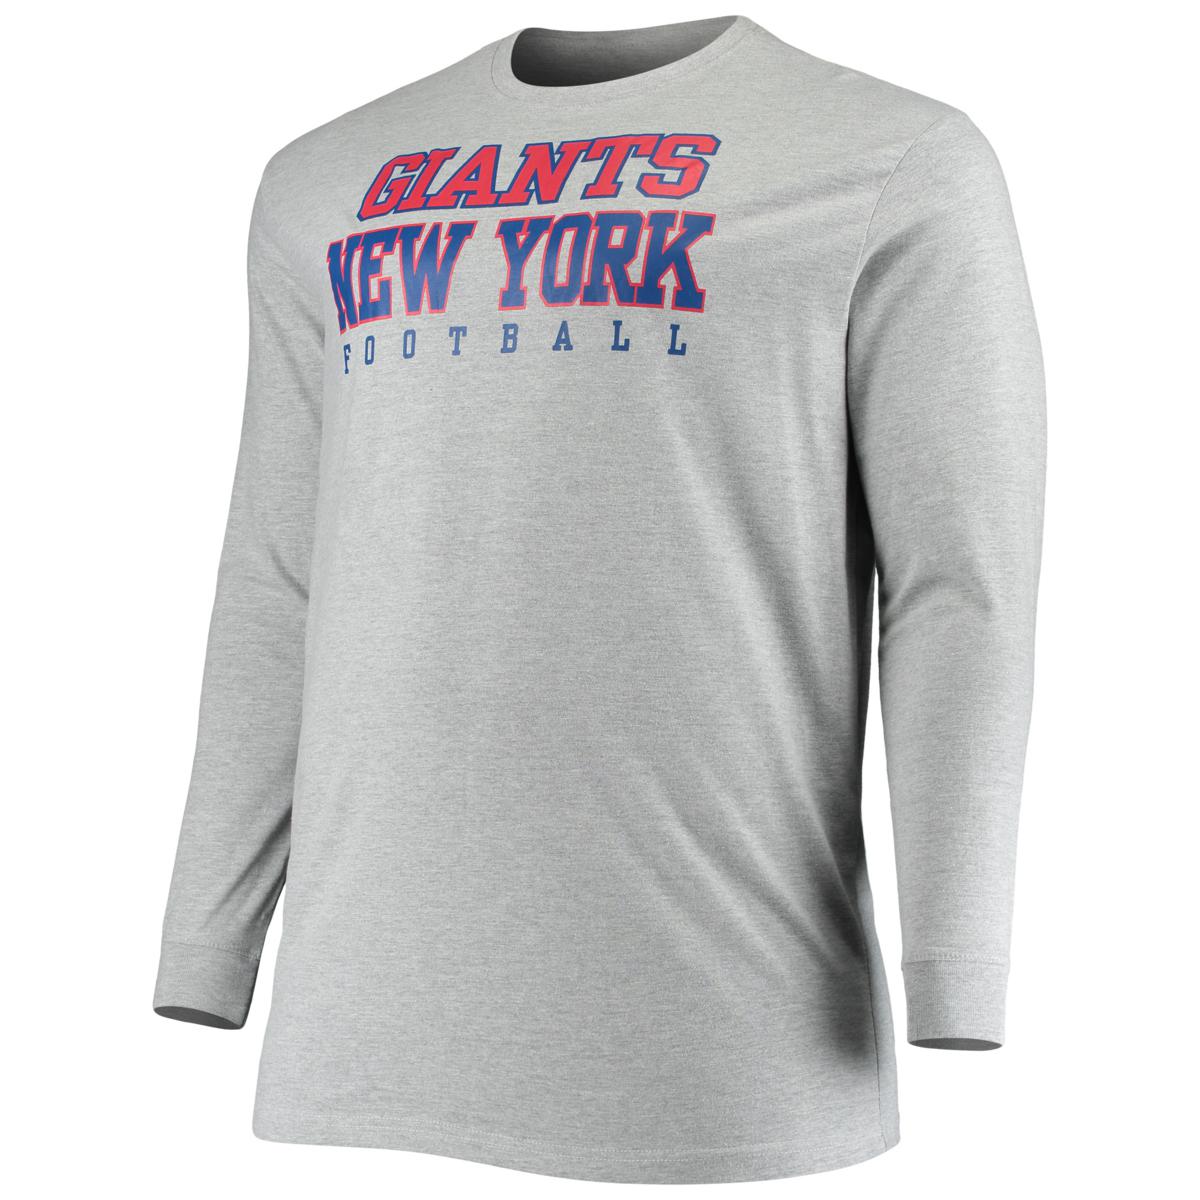 Officially Licensed NFL Mens Gray Big & Tall Practice T-Shirt